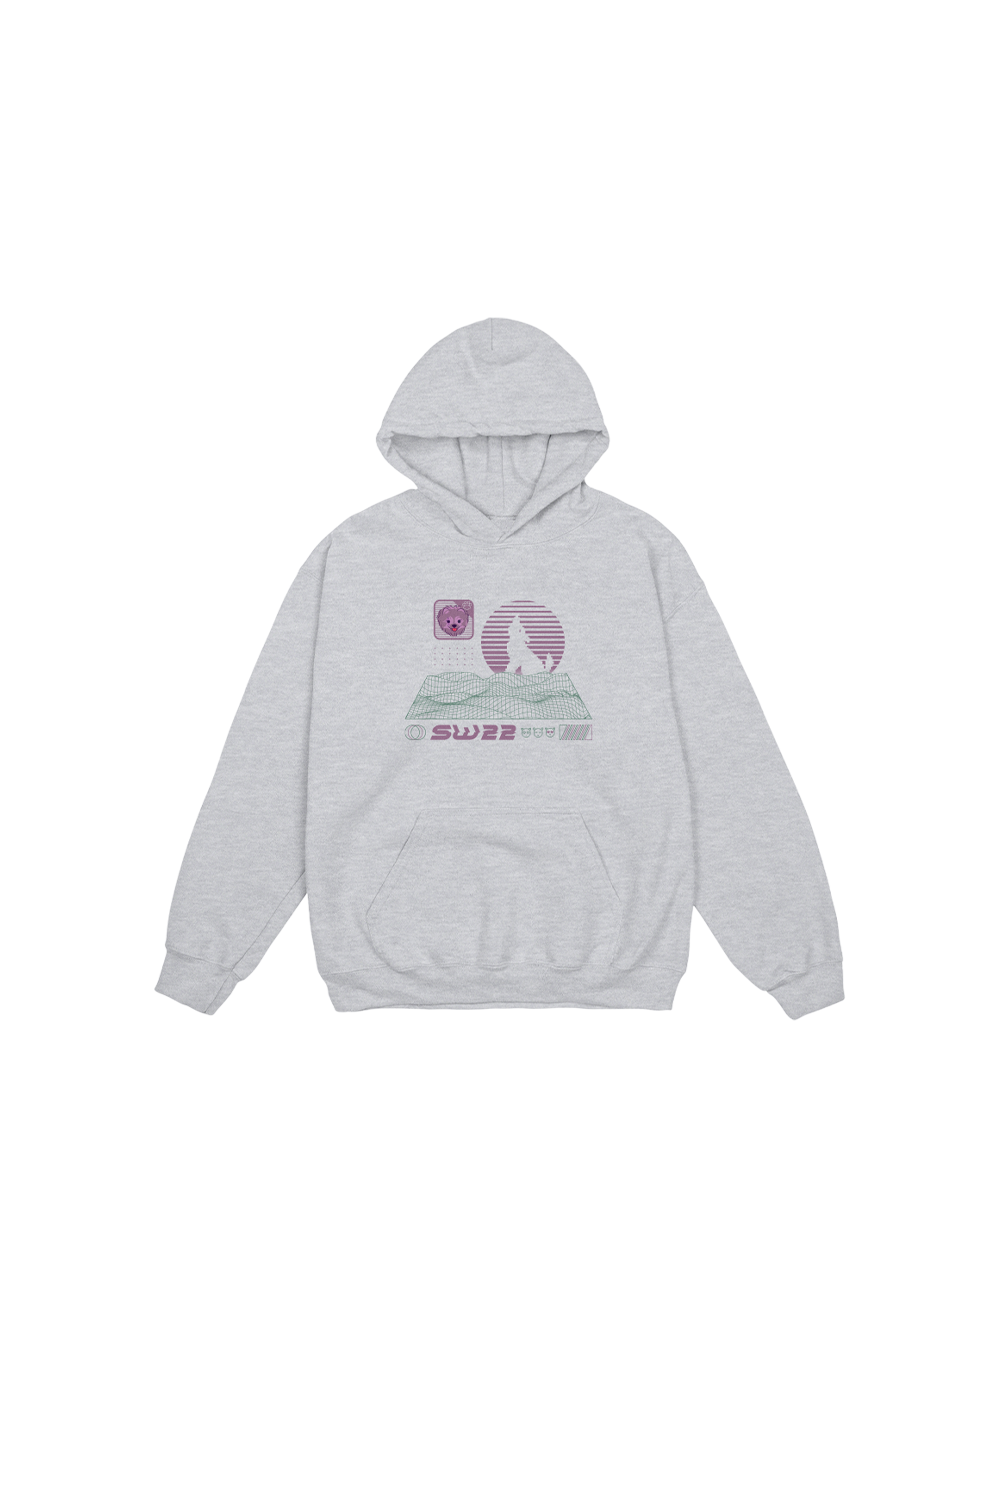 Synthwave Youth Grey Hoodie